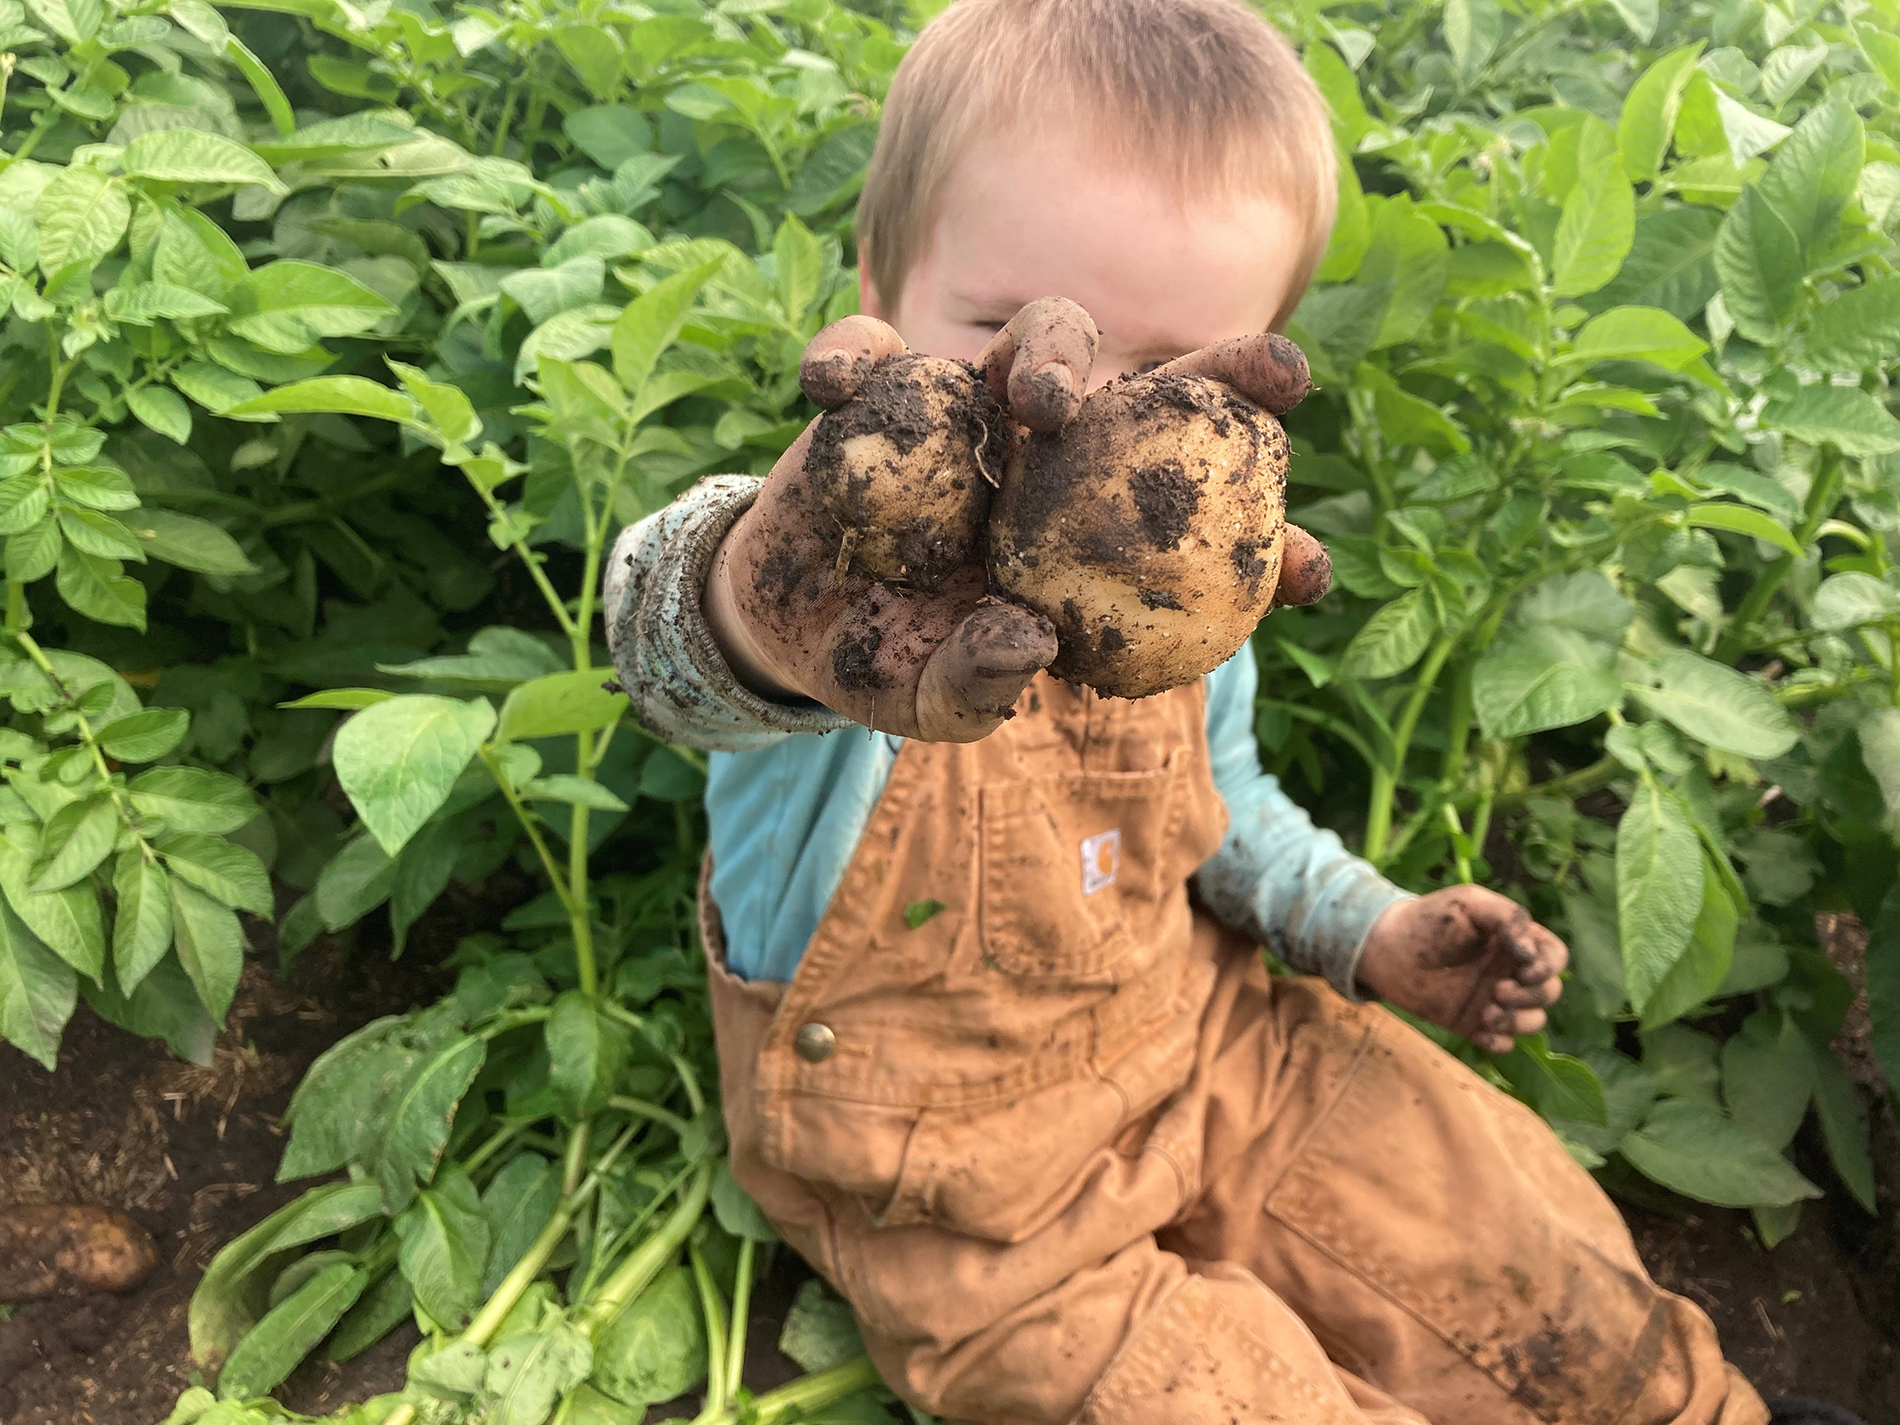 A little boy showing off tubers